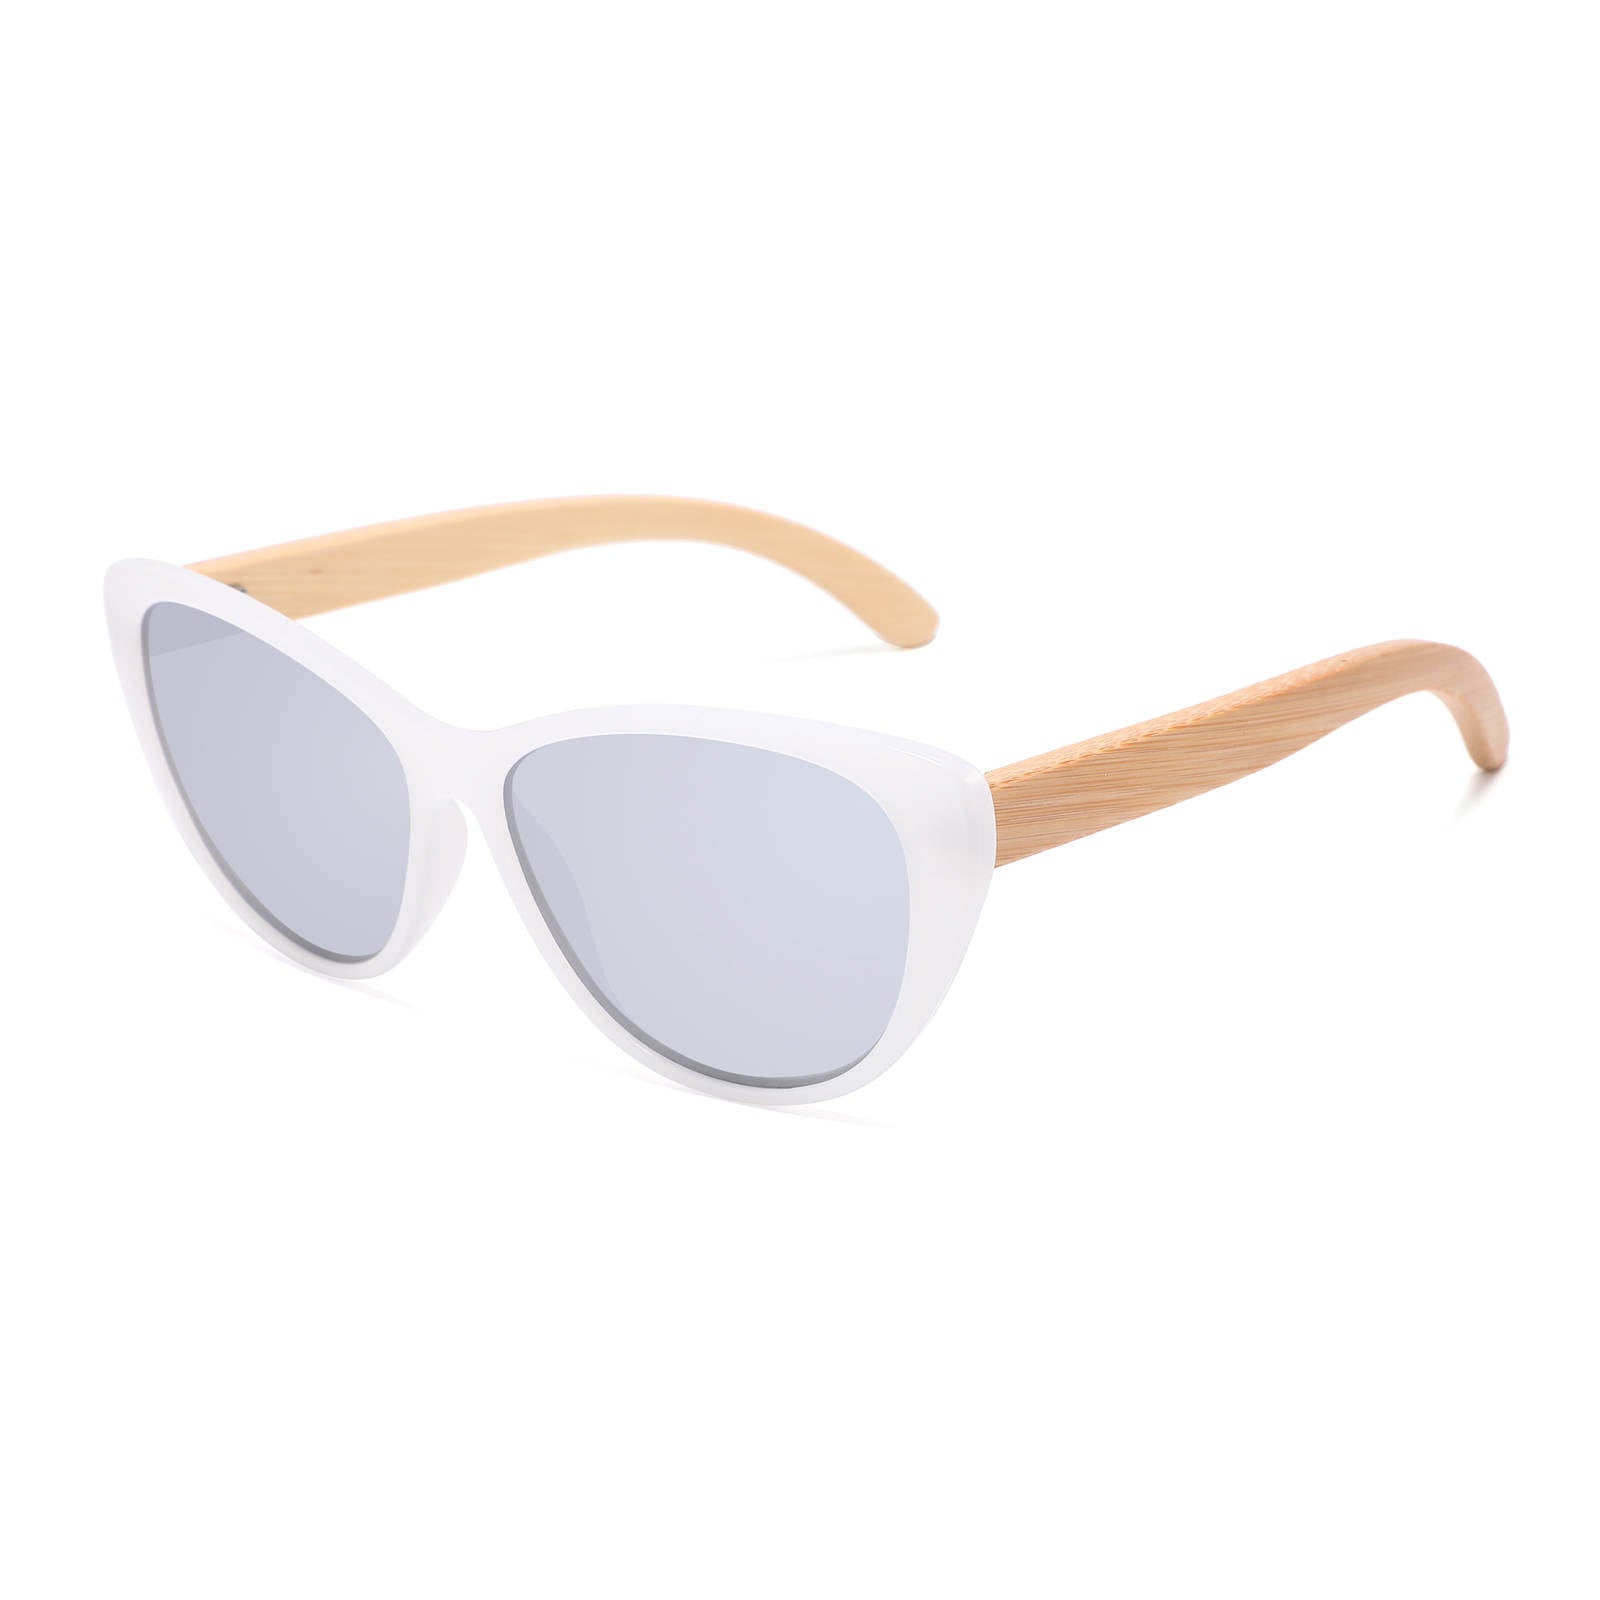 Matoaka Bamboo - White Frame With Bamboo Arms and Gray Lens